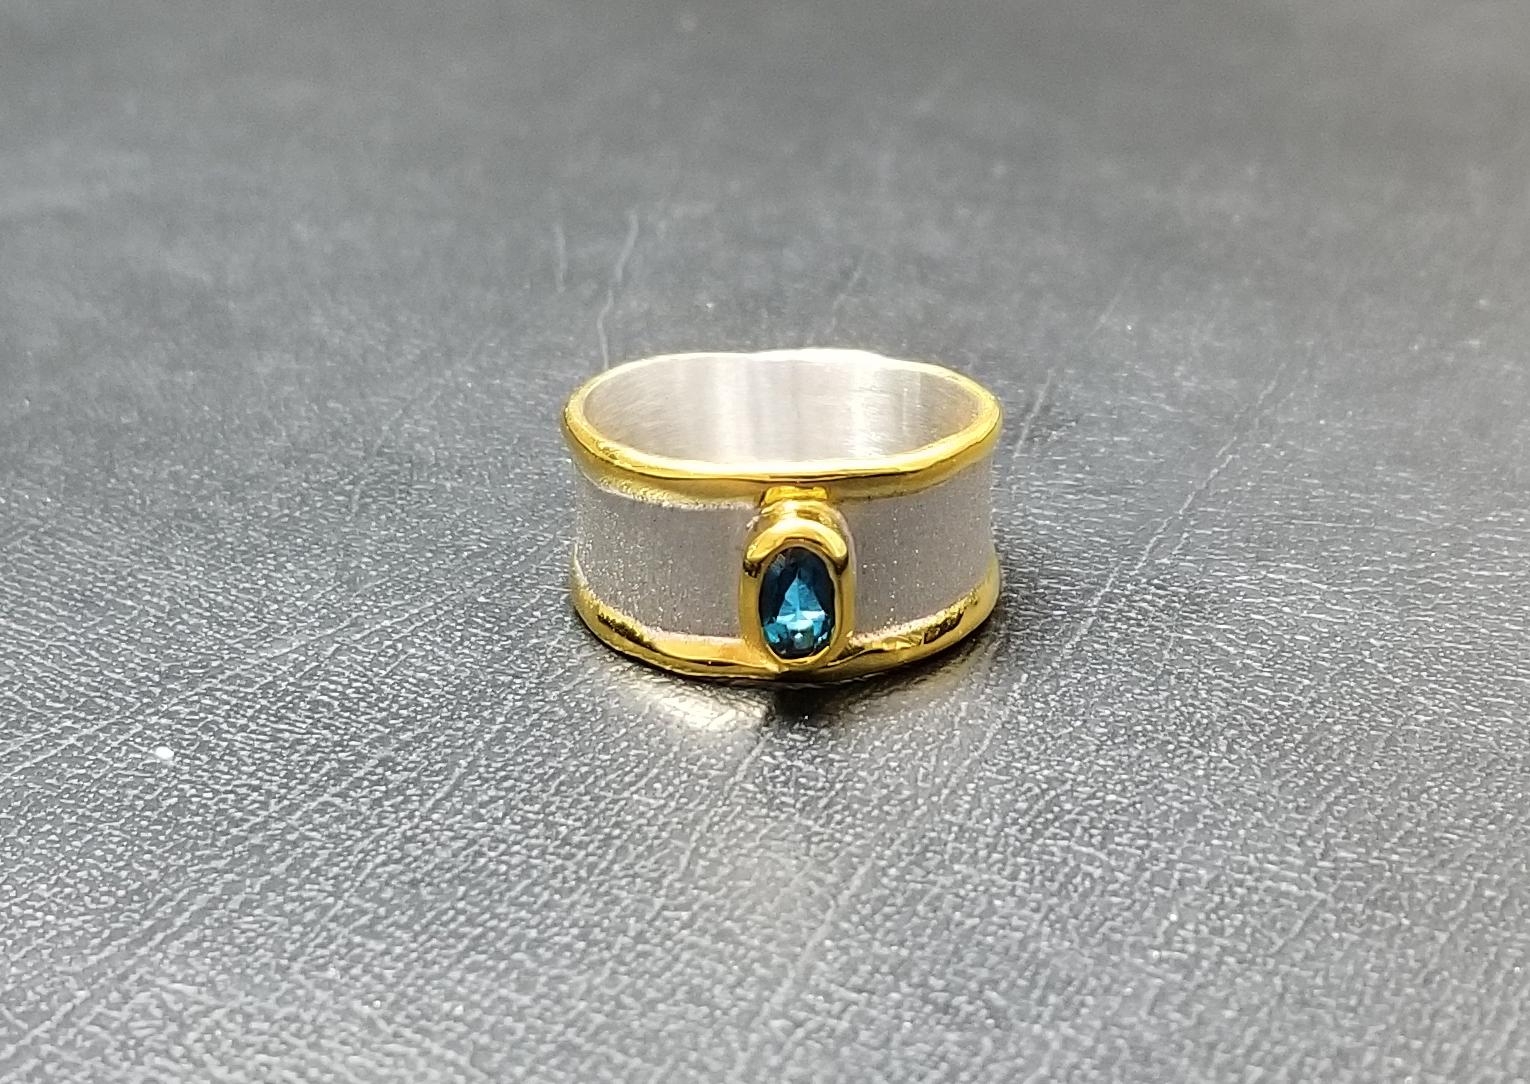 Oval Cut Yianni Creations 0.57 Carat Blue Topaz Ring in Fine Silver and 24 Karat Gold